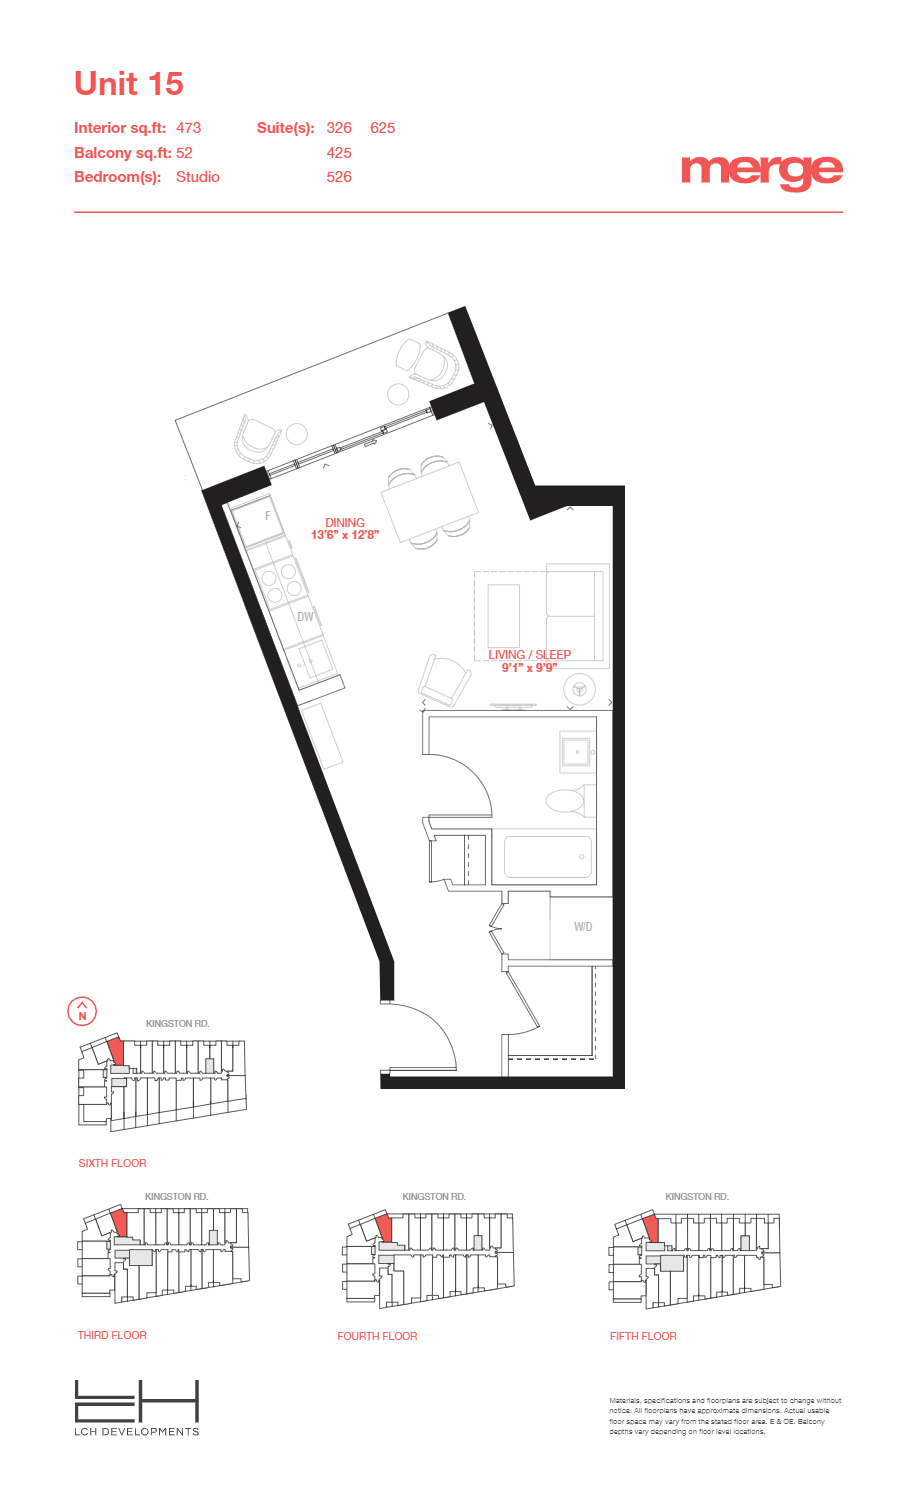 15 Floor Plan of Merge Condos with undefined beds